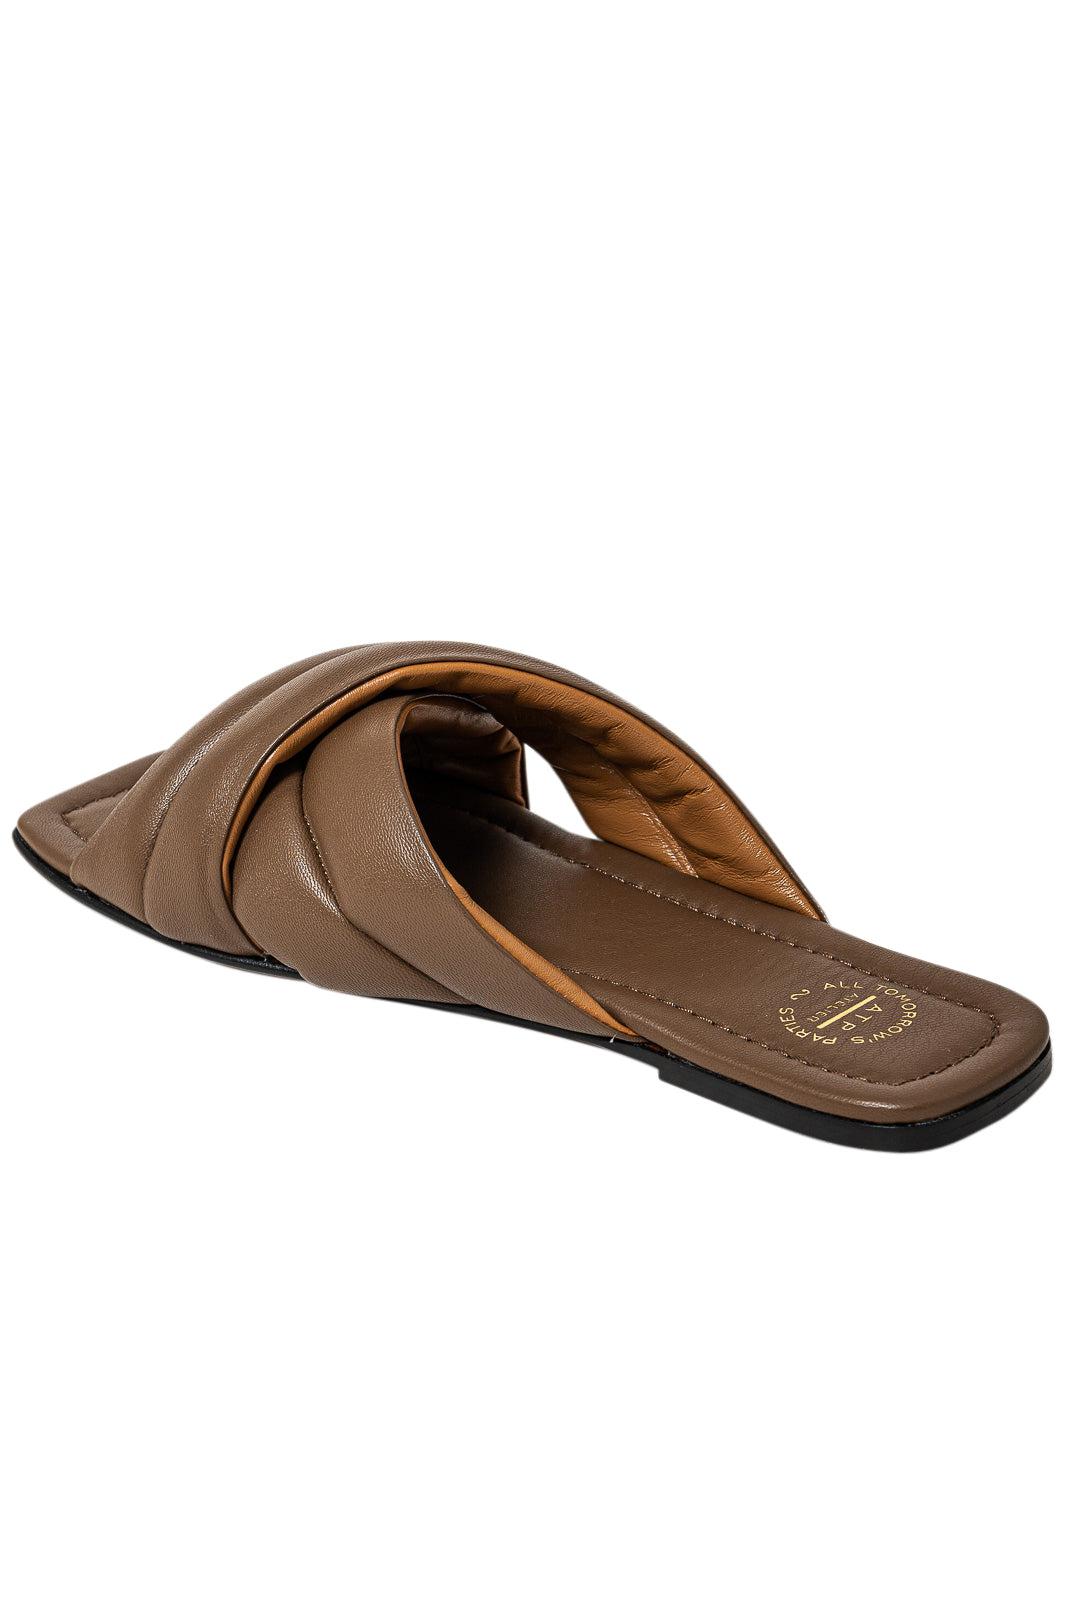 Atp Atelier-Cotti nappa flat sandals-dgallerystore